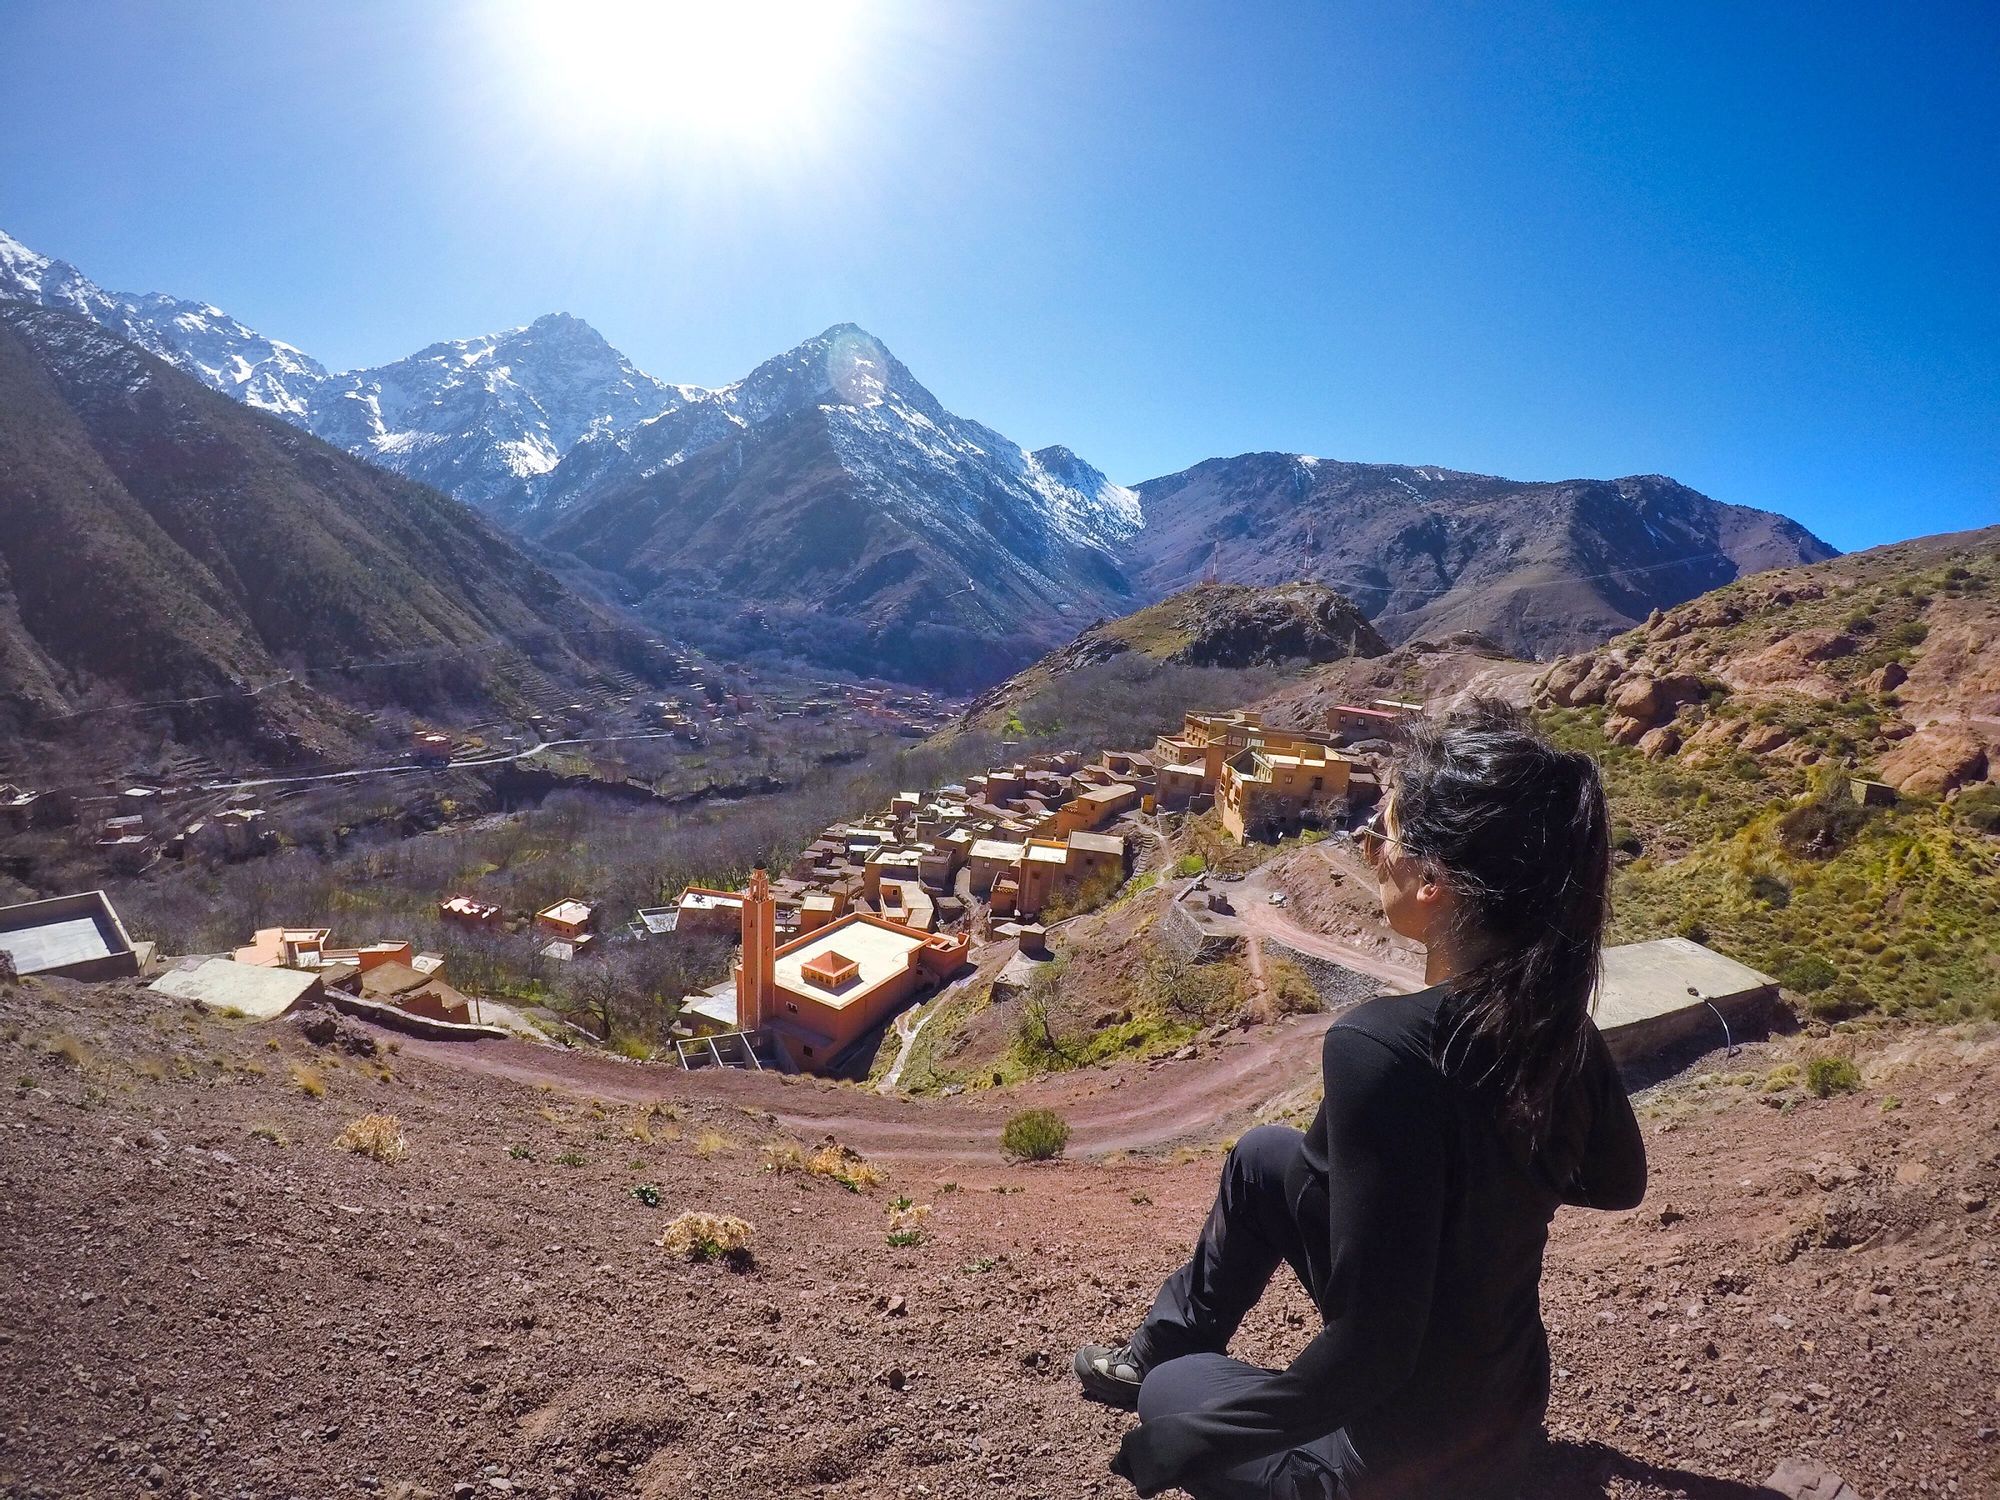 A woman poses in the Atlas Mountains of Morocco.